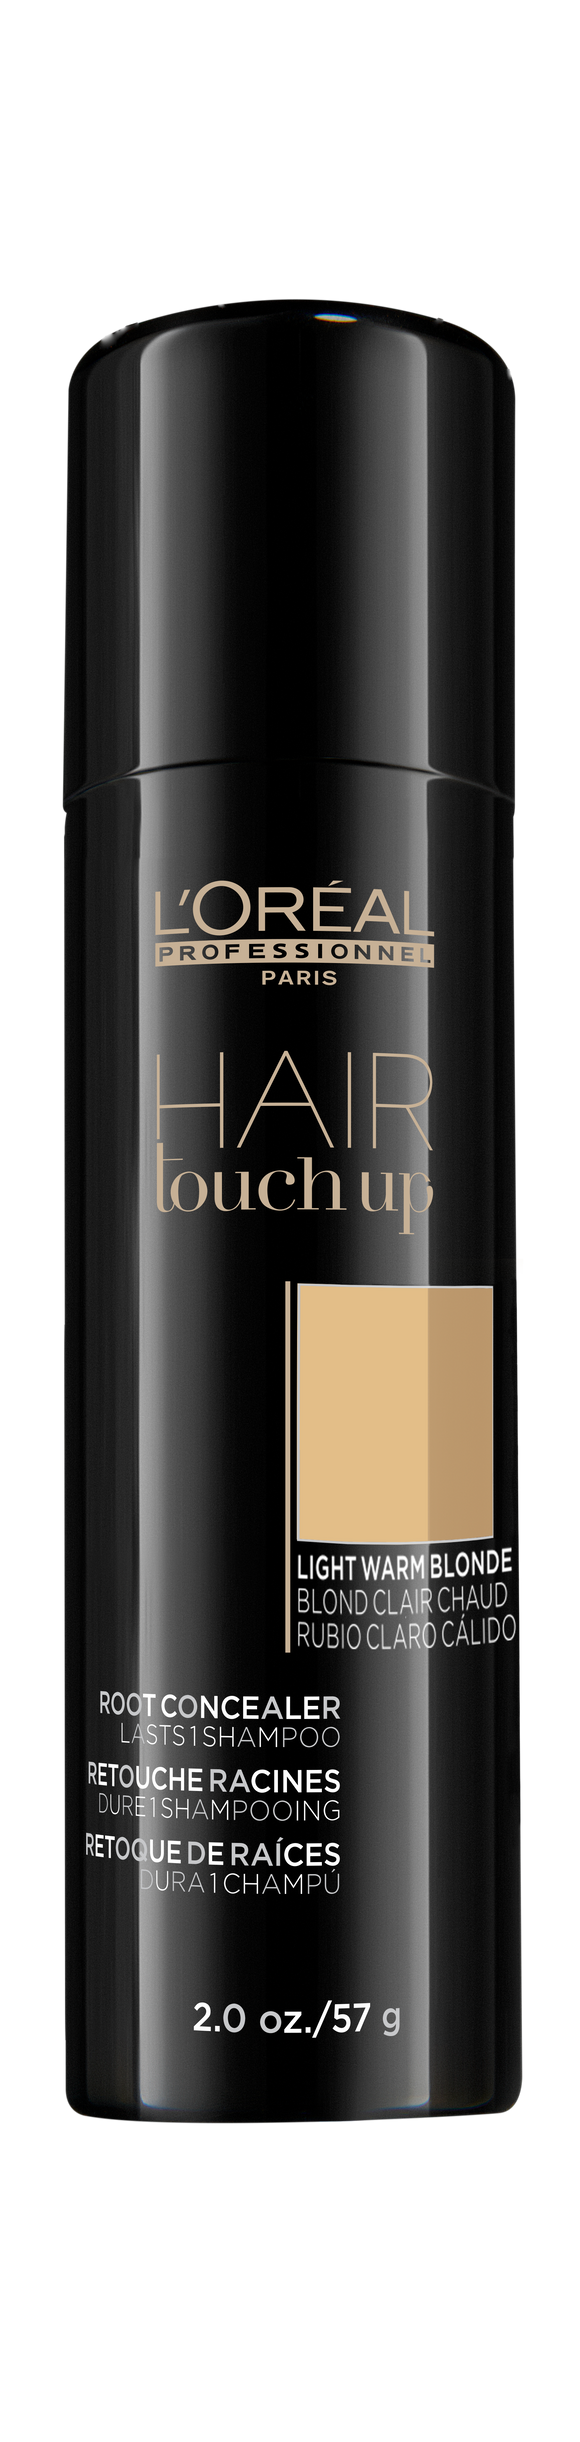 hair touch up blond chaud